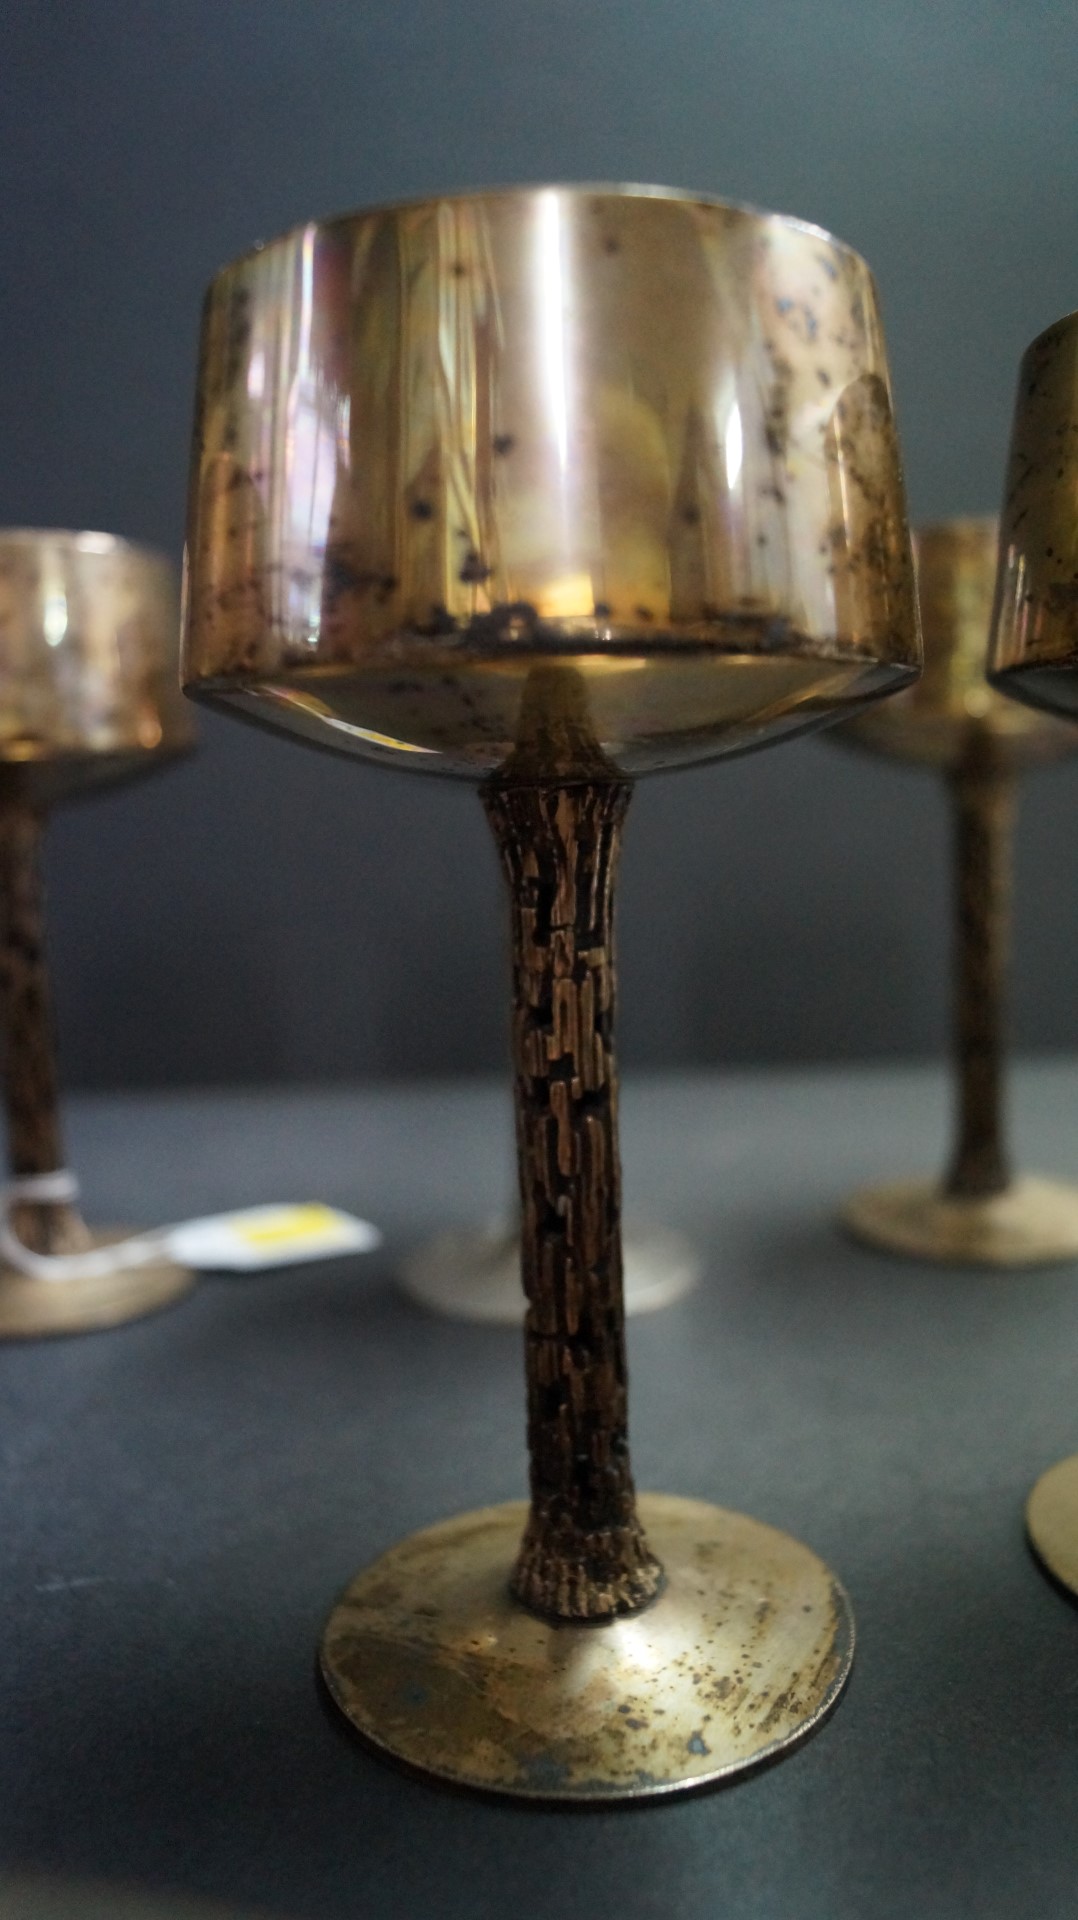 A set of six silver goblets, by Christopher Nigel Lawrence, London 1989, 1224g, 14.5cm. - Image 3 of 3